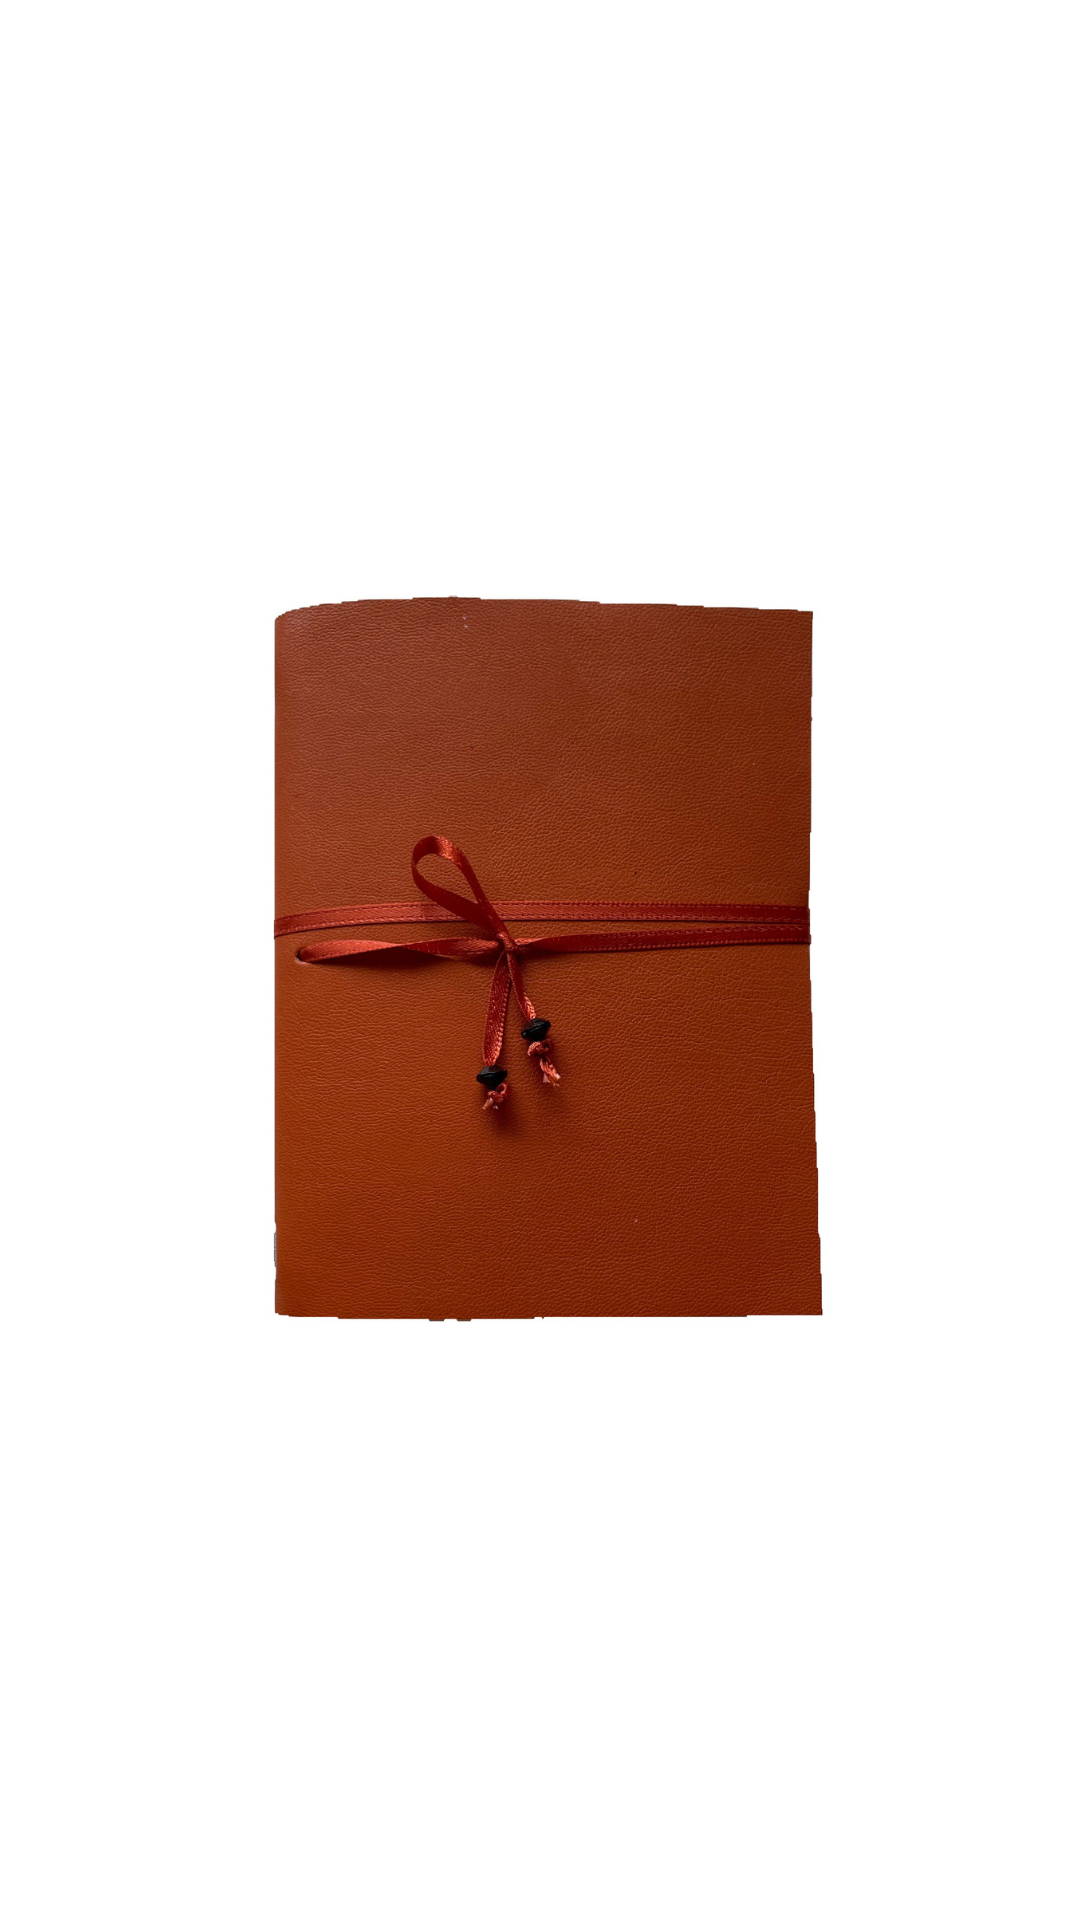 Tan Faux Leather A6 Refillable Journal Notebook - Tan with quality vellum plain pages inserts.